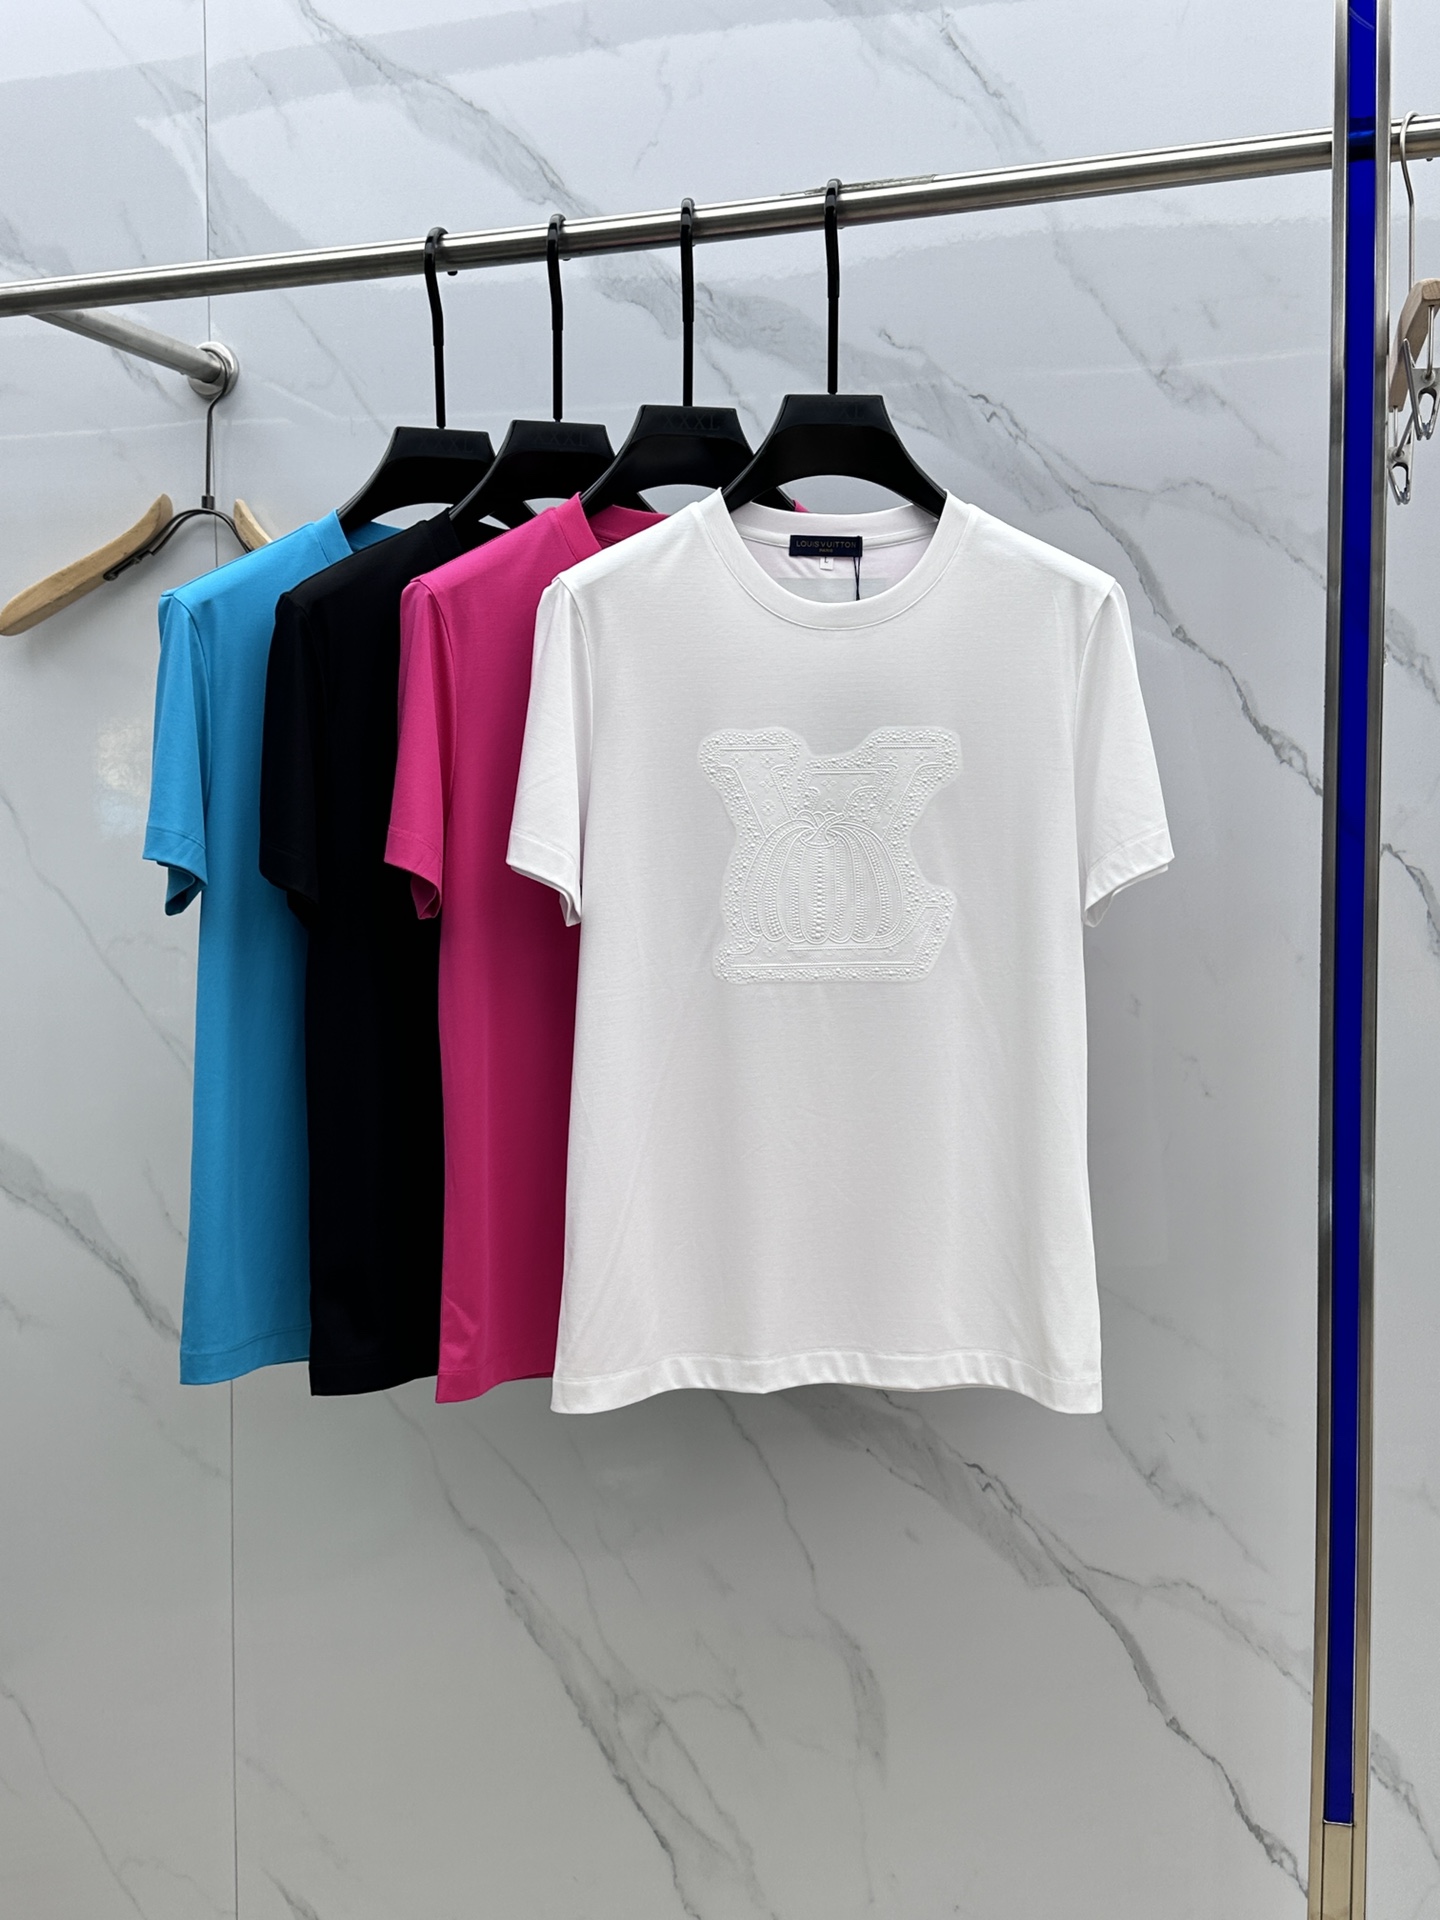 Louis Vuitton Clothing T-Shirt Best Designer Replica
 Embroidery Cotton Mercerized Summer Collection